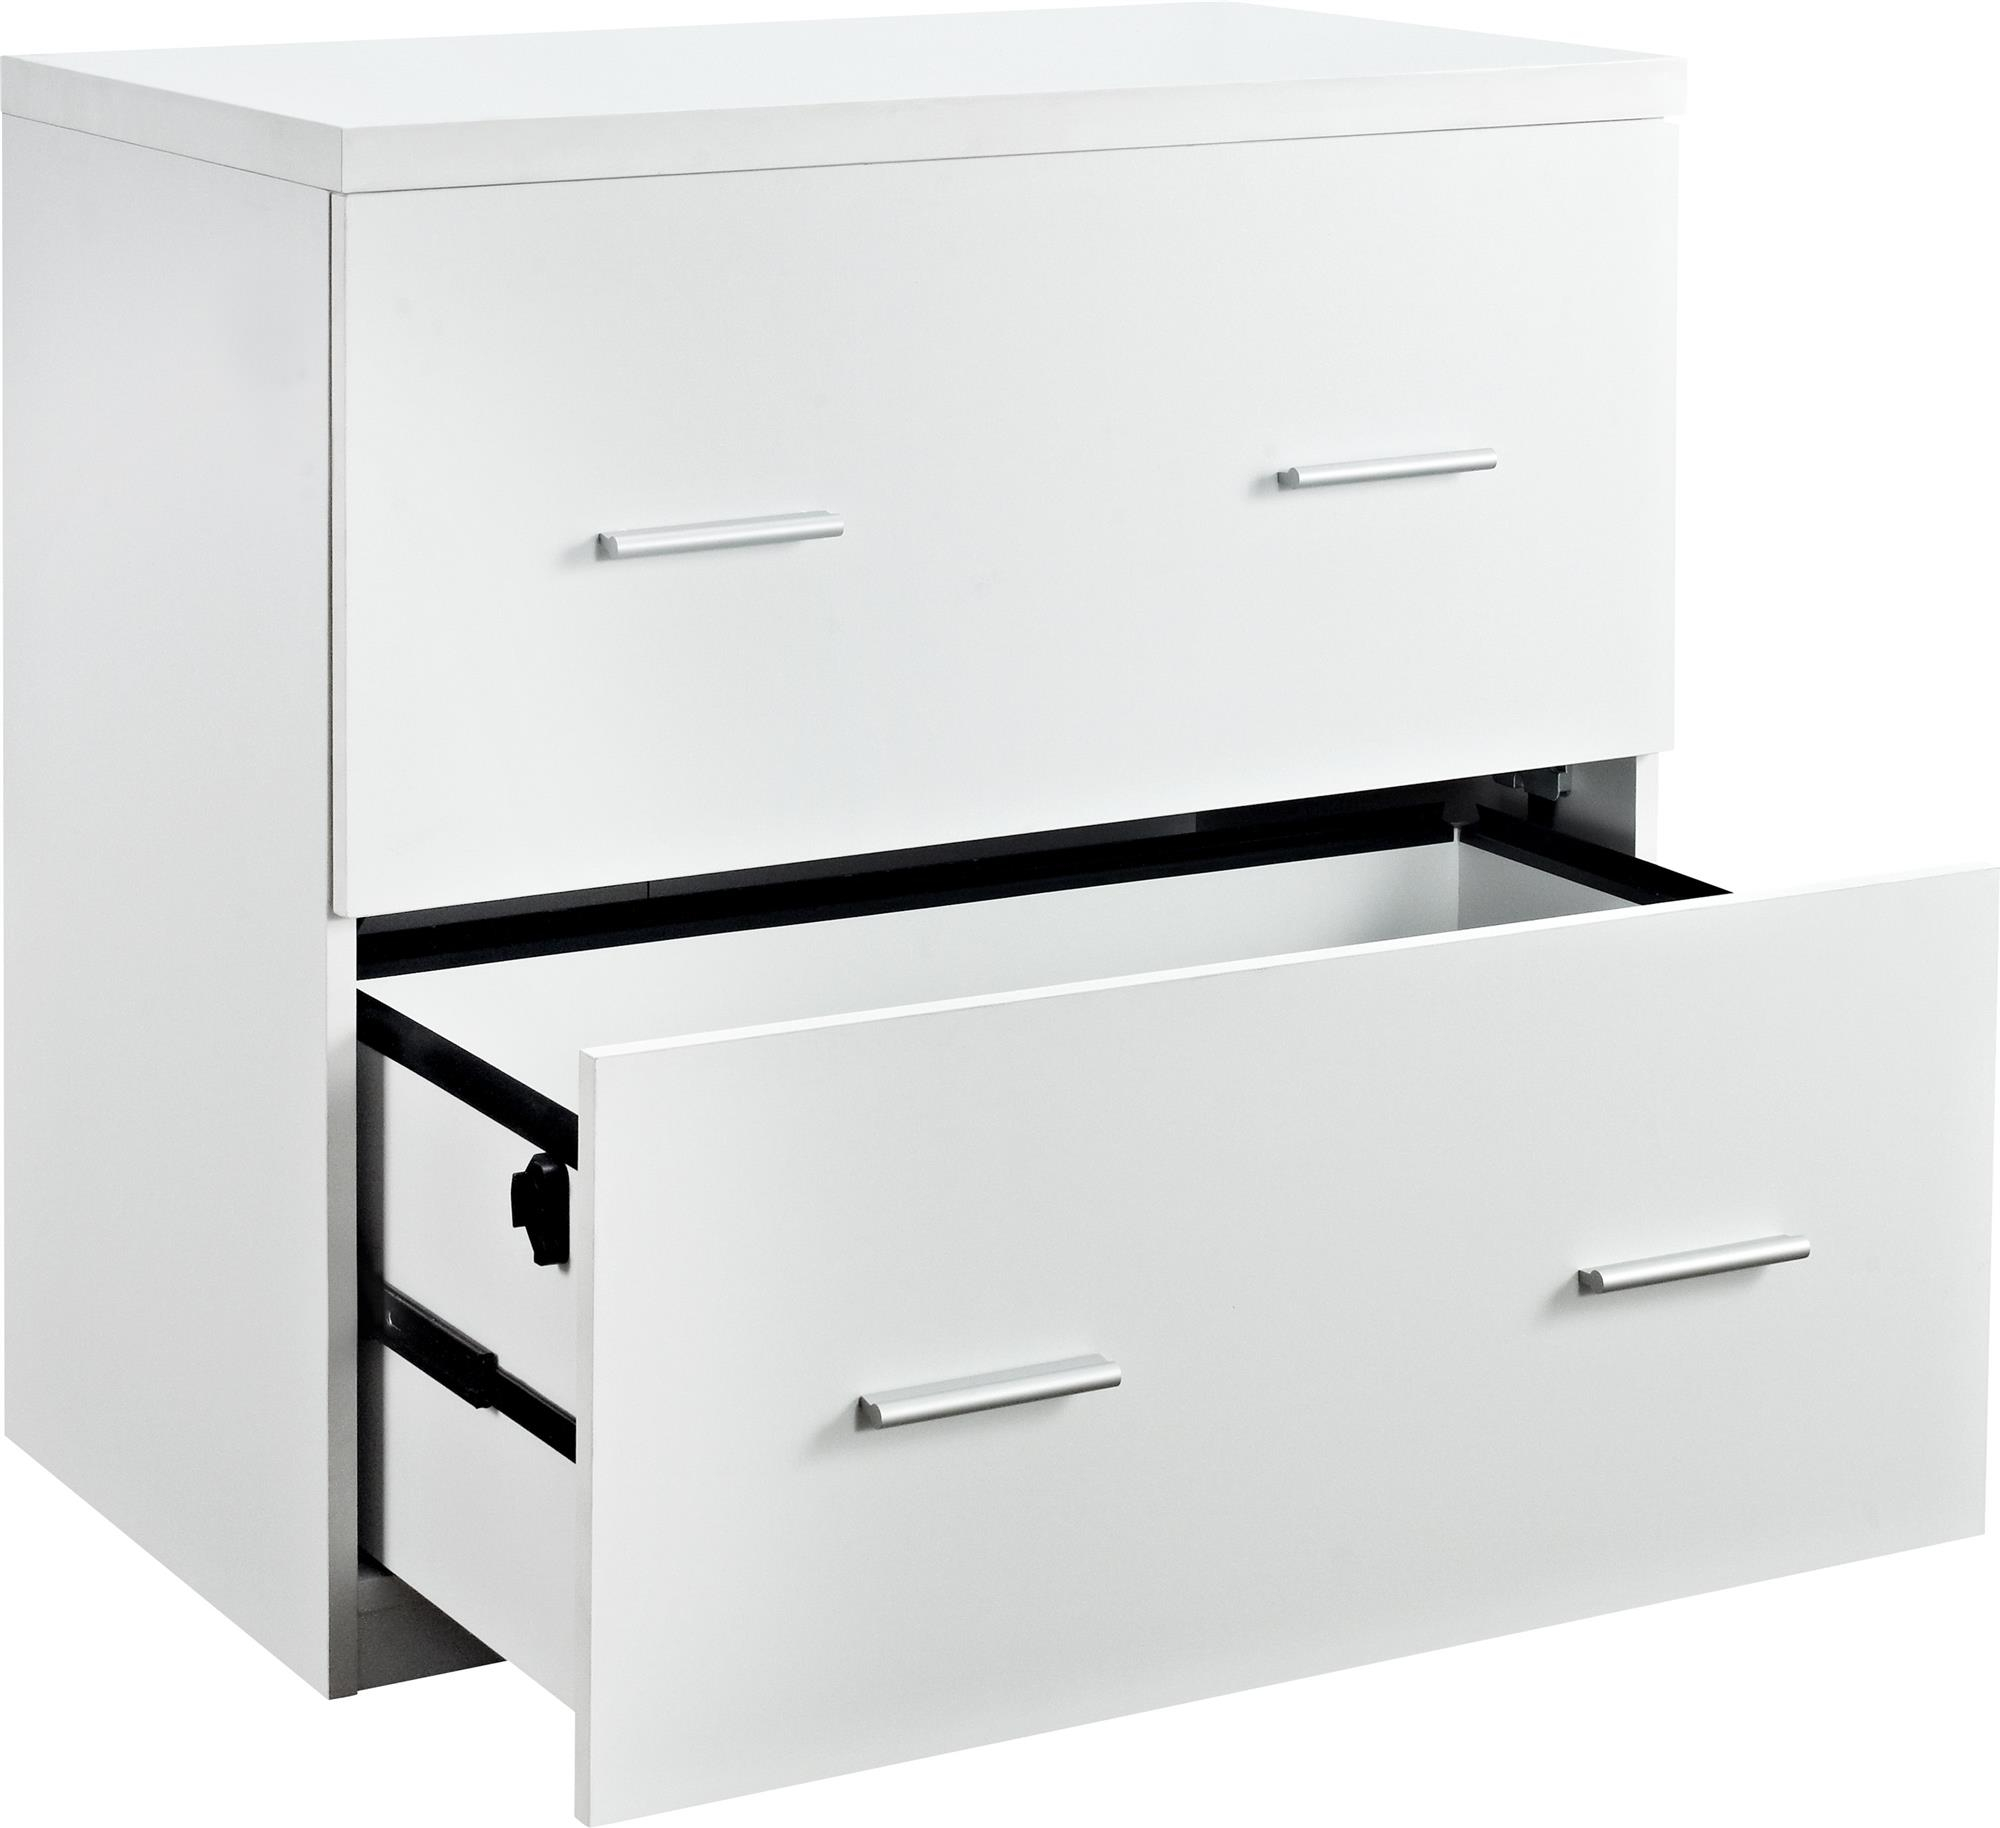 Ameriwood Home Princeton Lateral File Cabinet White Walmart within sizing 2000 X 1828